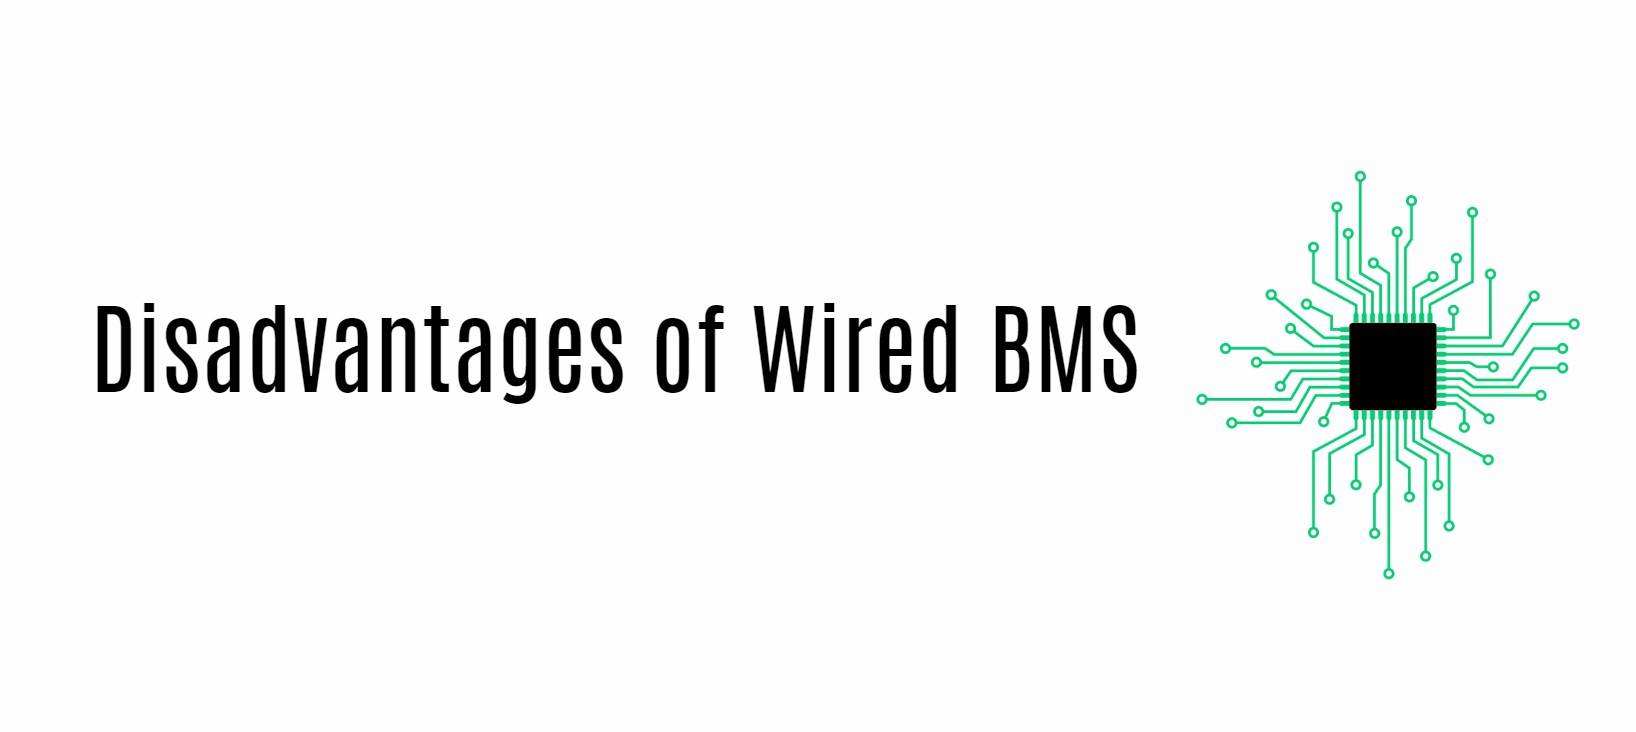 Disadvantages of Wired BMS